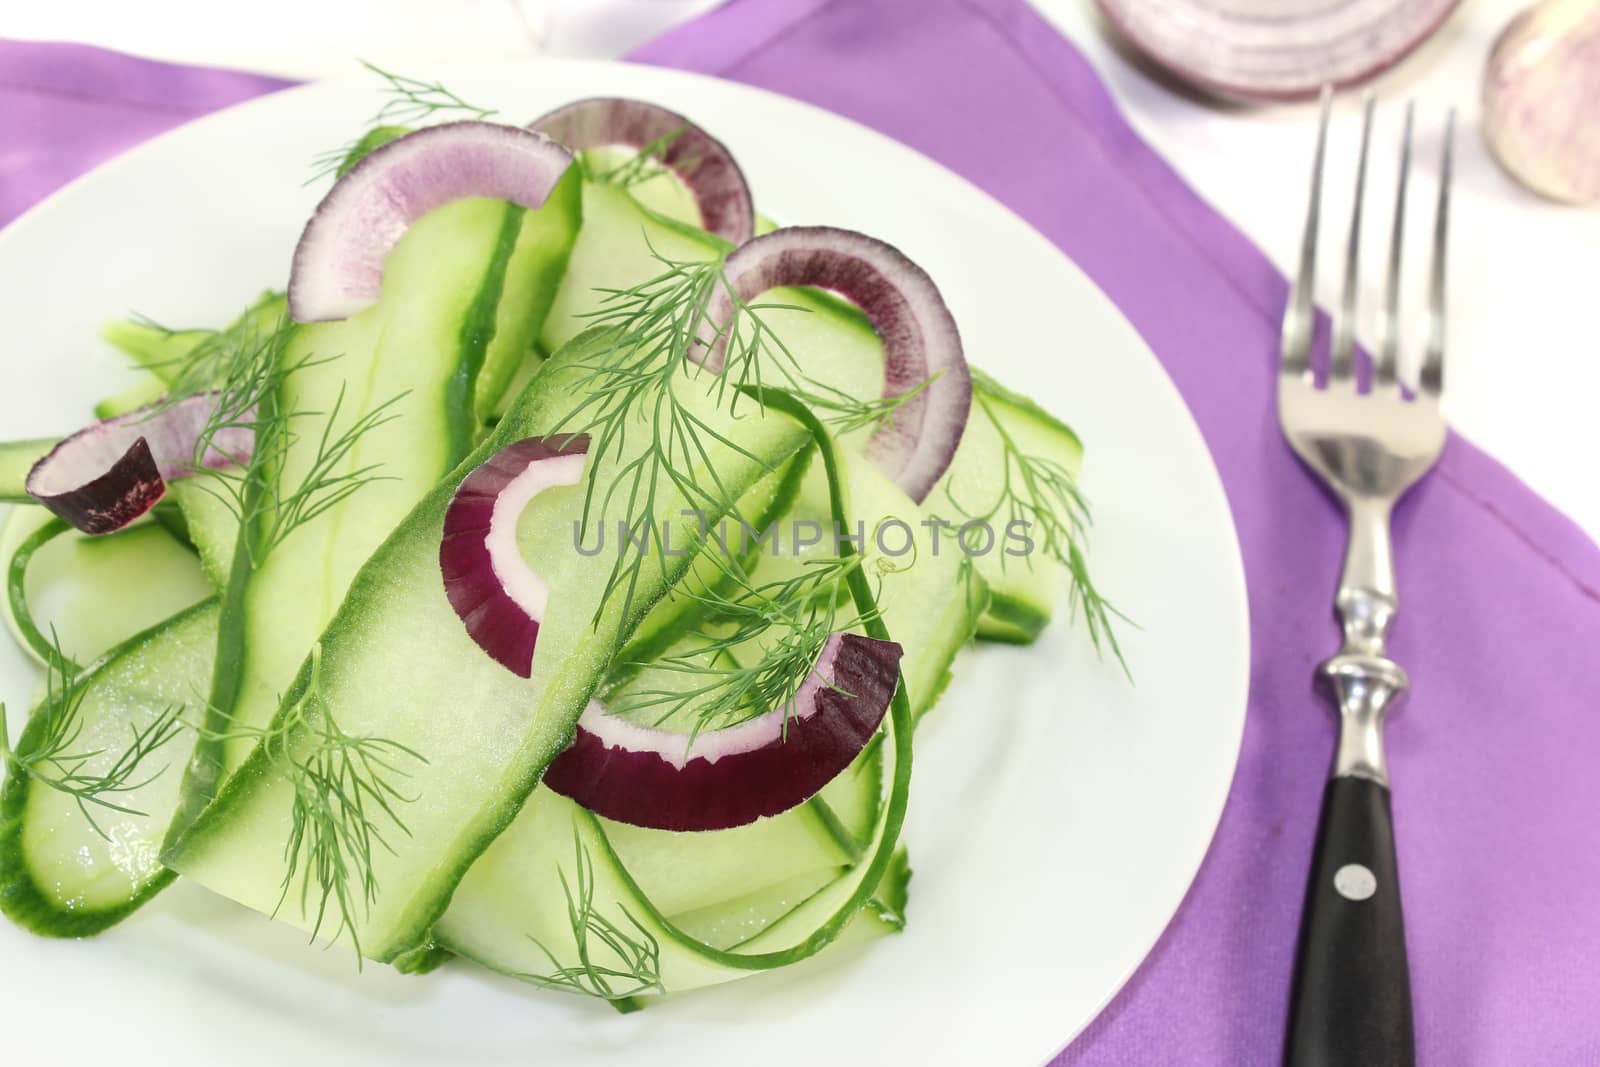 Cucumber salad with red onions and dill by discovery